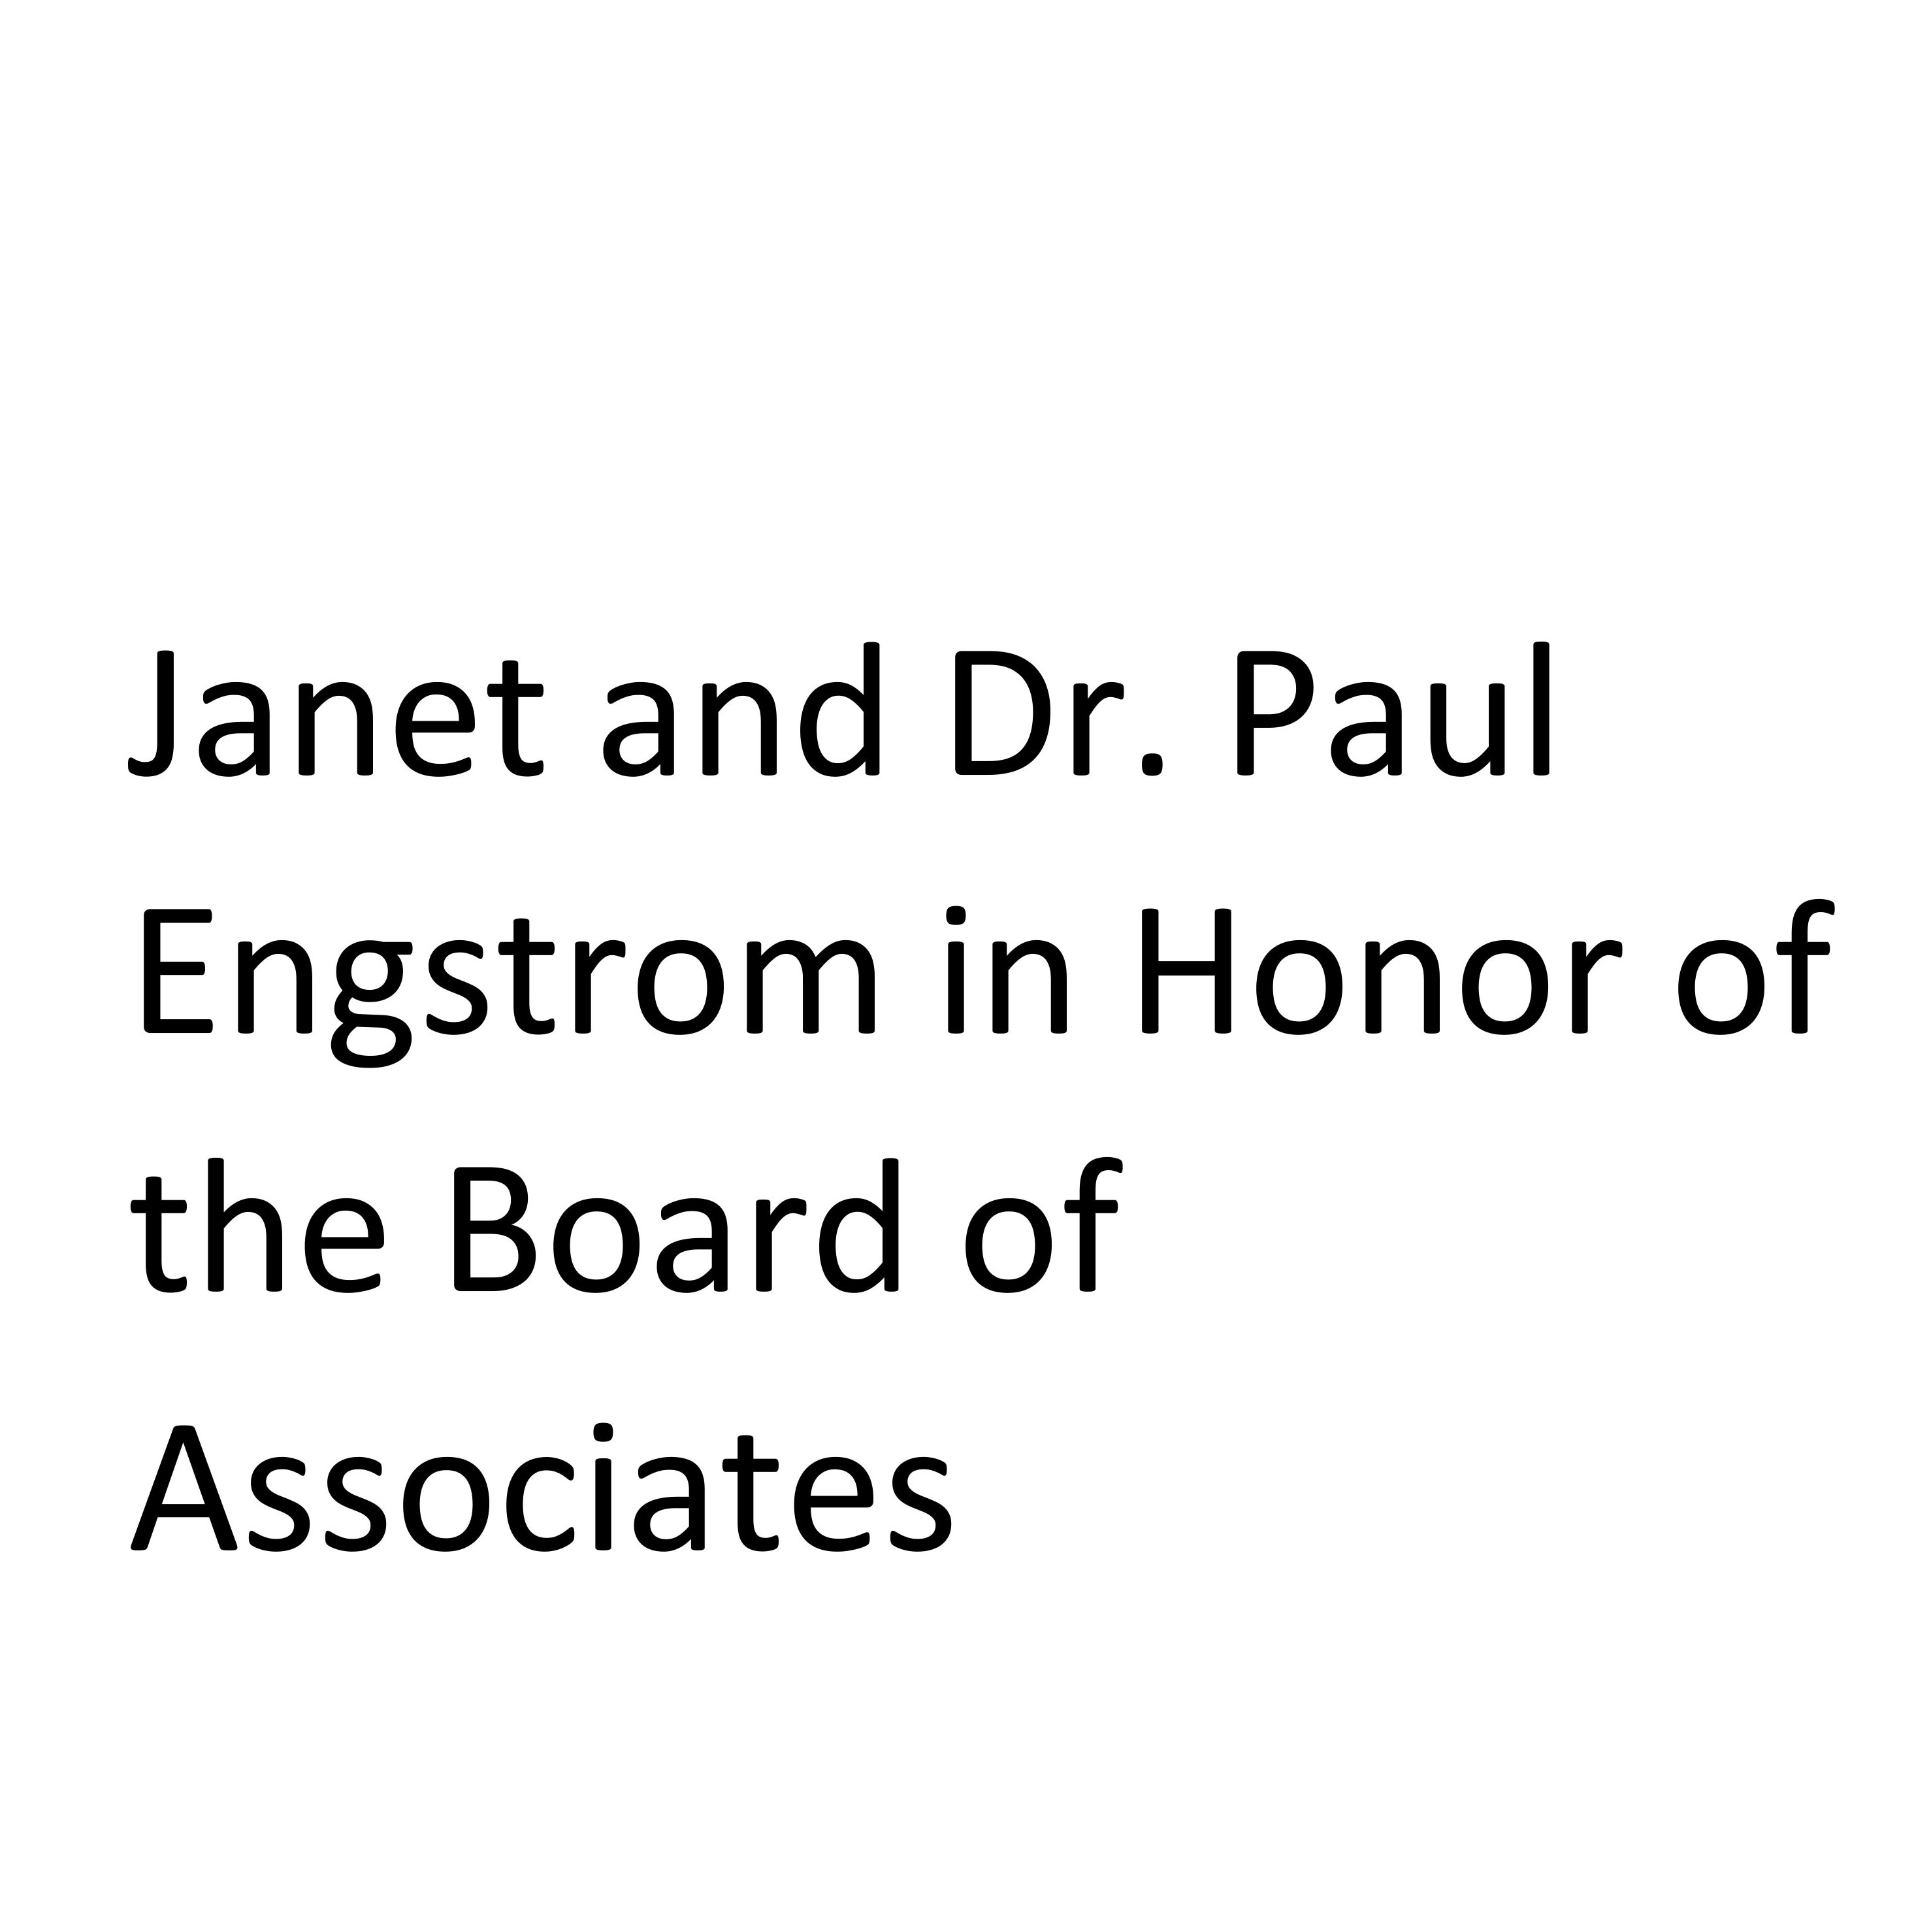 Janet and Dr. Paul Engstrom in Honor of the Board Associates Logo